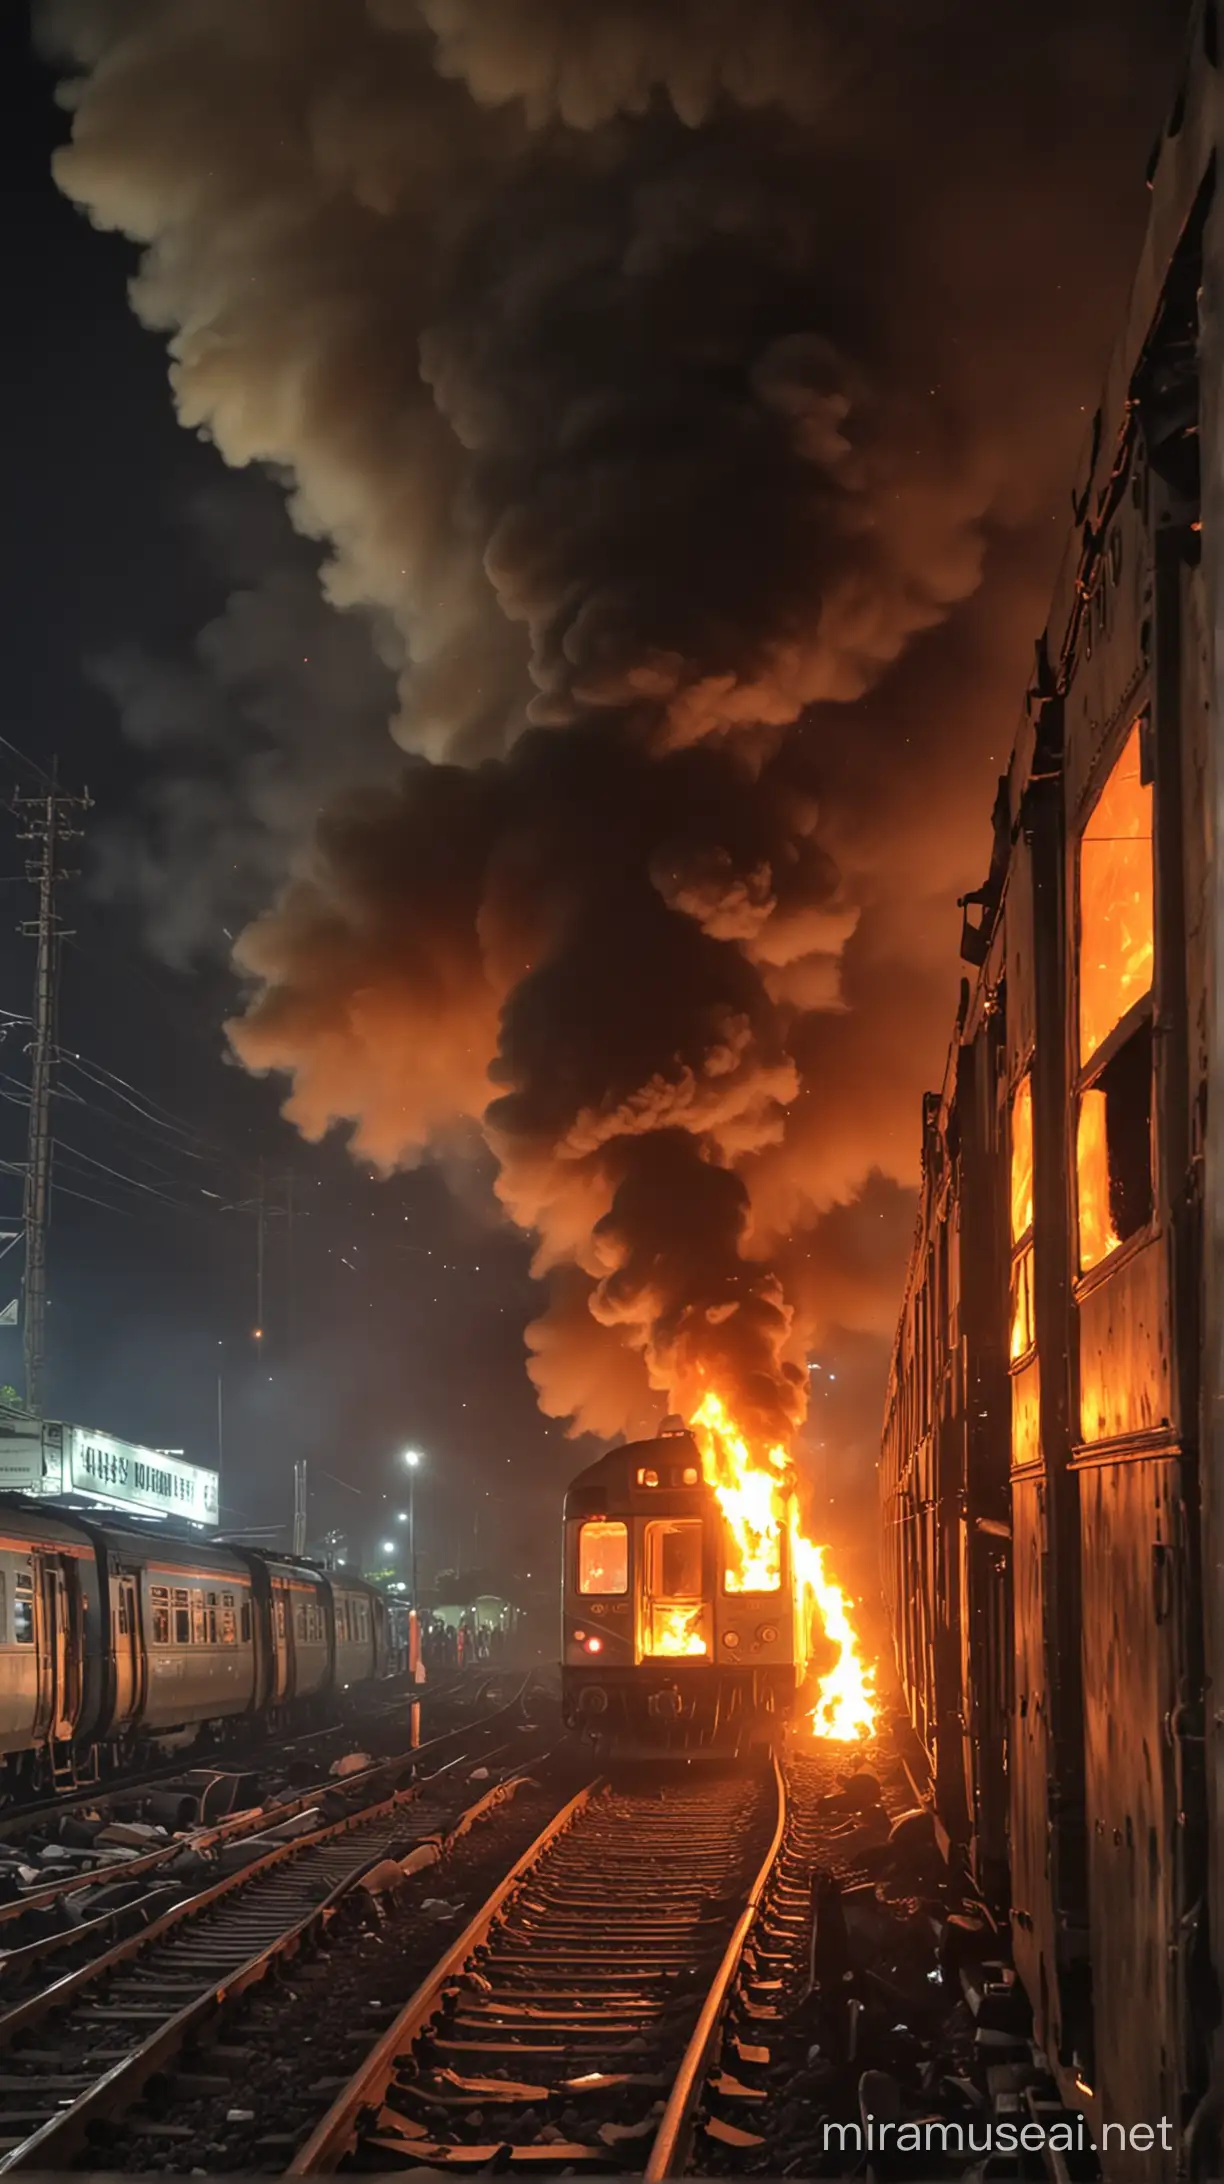 Train in Jakarta is on fire, at night, close up shot, tense atmosphere, the flames are getting bigger, local residents immortalize the moment with their cell phone cameras, the train is running on fire, the front carriage is on fire, shot from the front of the train